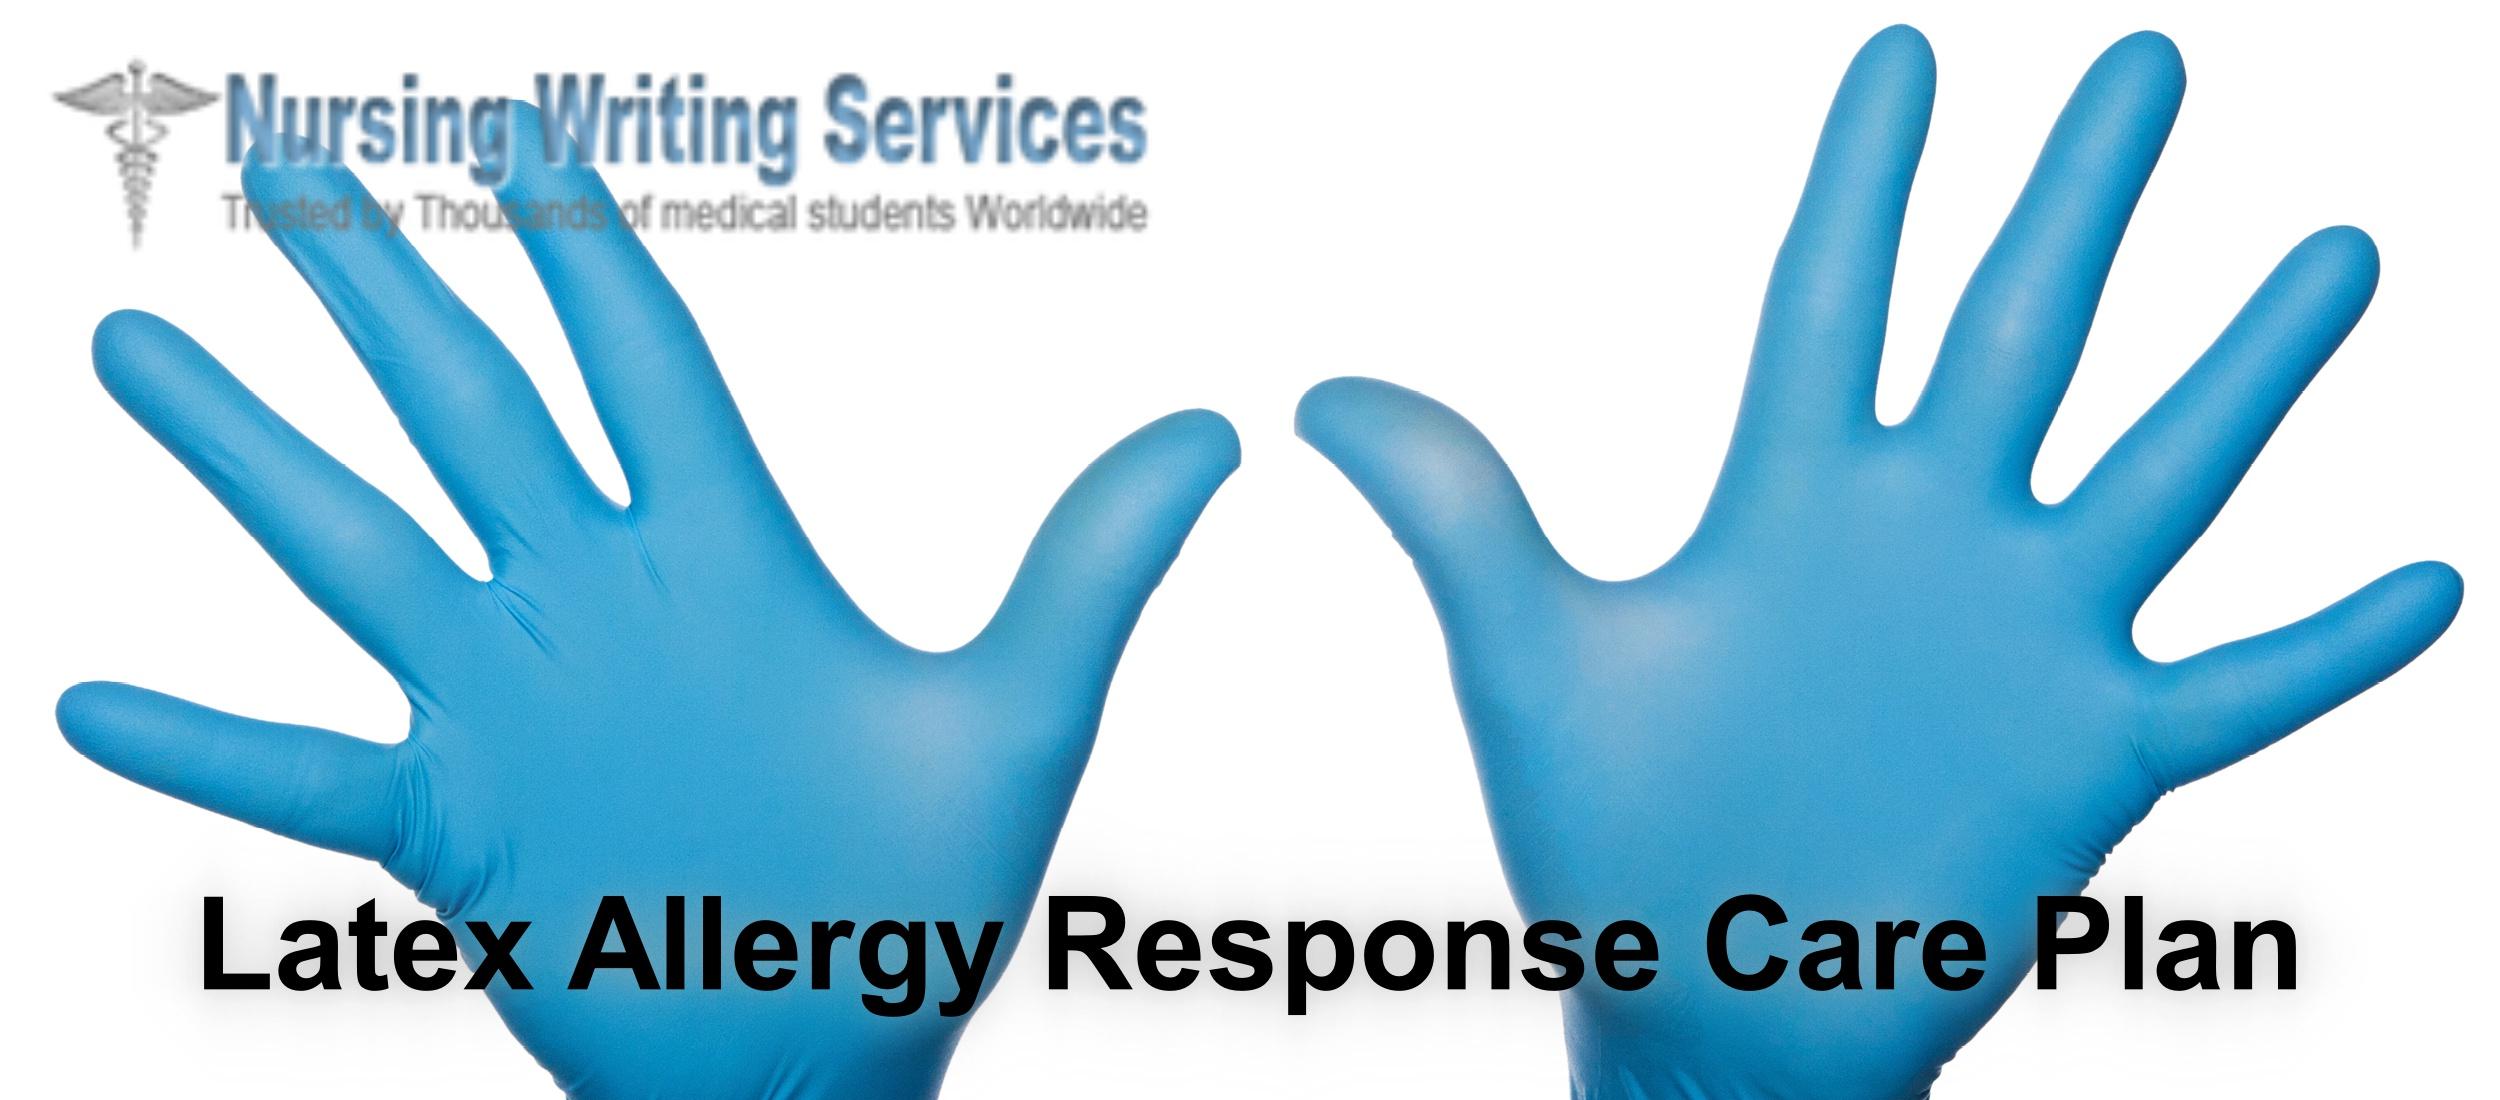 Latex Allergy Response Care Plan Writing Services